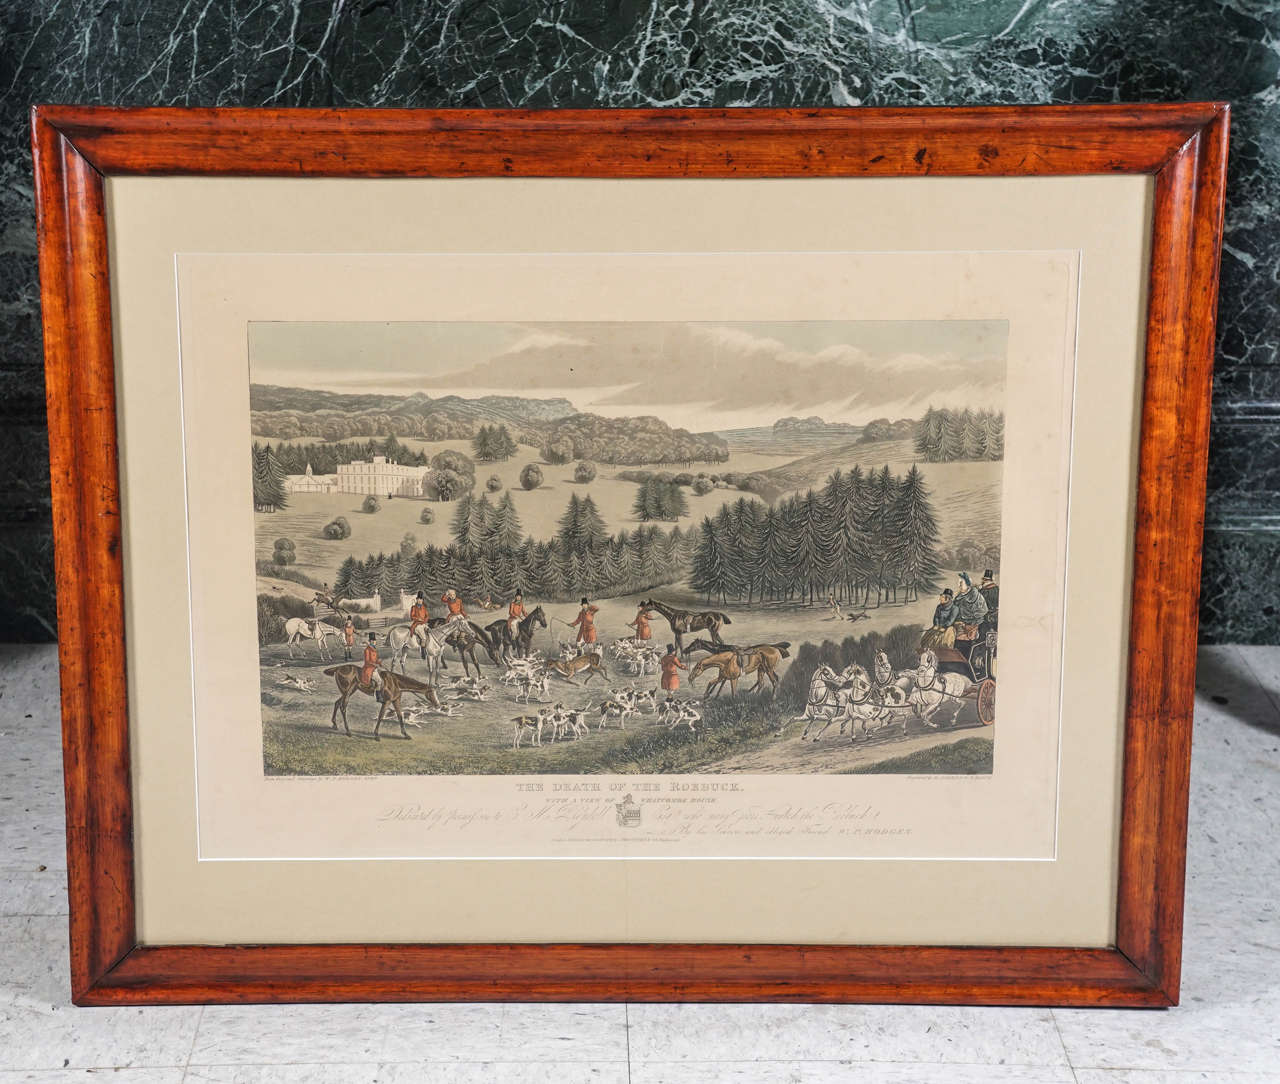 These two works commemorate the great English pastime of gentlemen hunt parties and social gatherings surrounding the land and its produce to those who own it. This very nice pair of hand-colored engravings was published in October of 1832. The